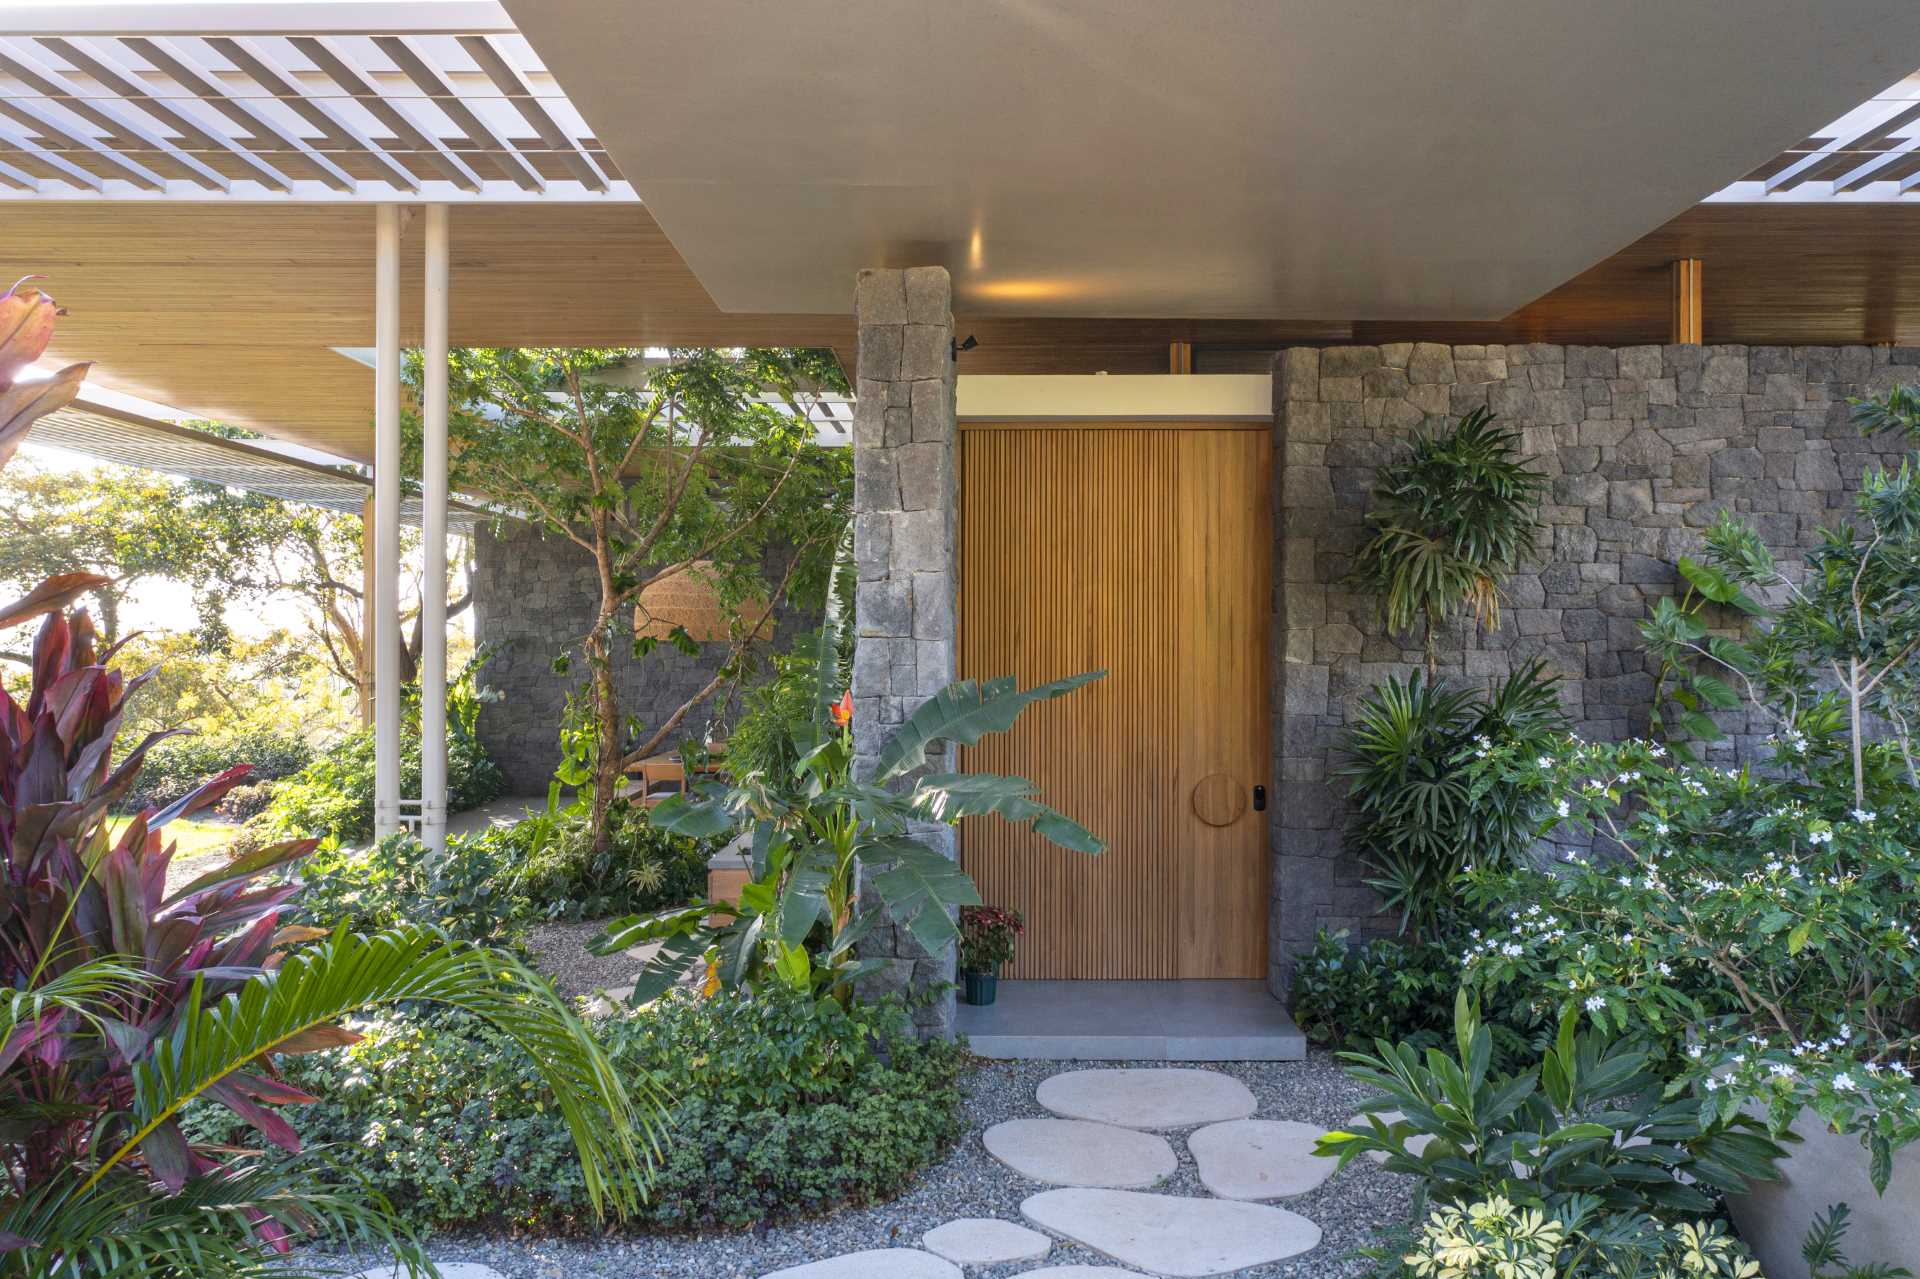 Stepping stone paths lead to the various entryways of this modern home.